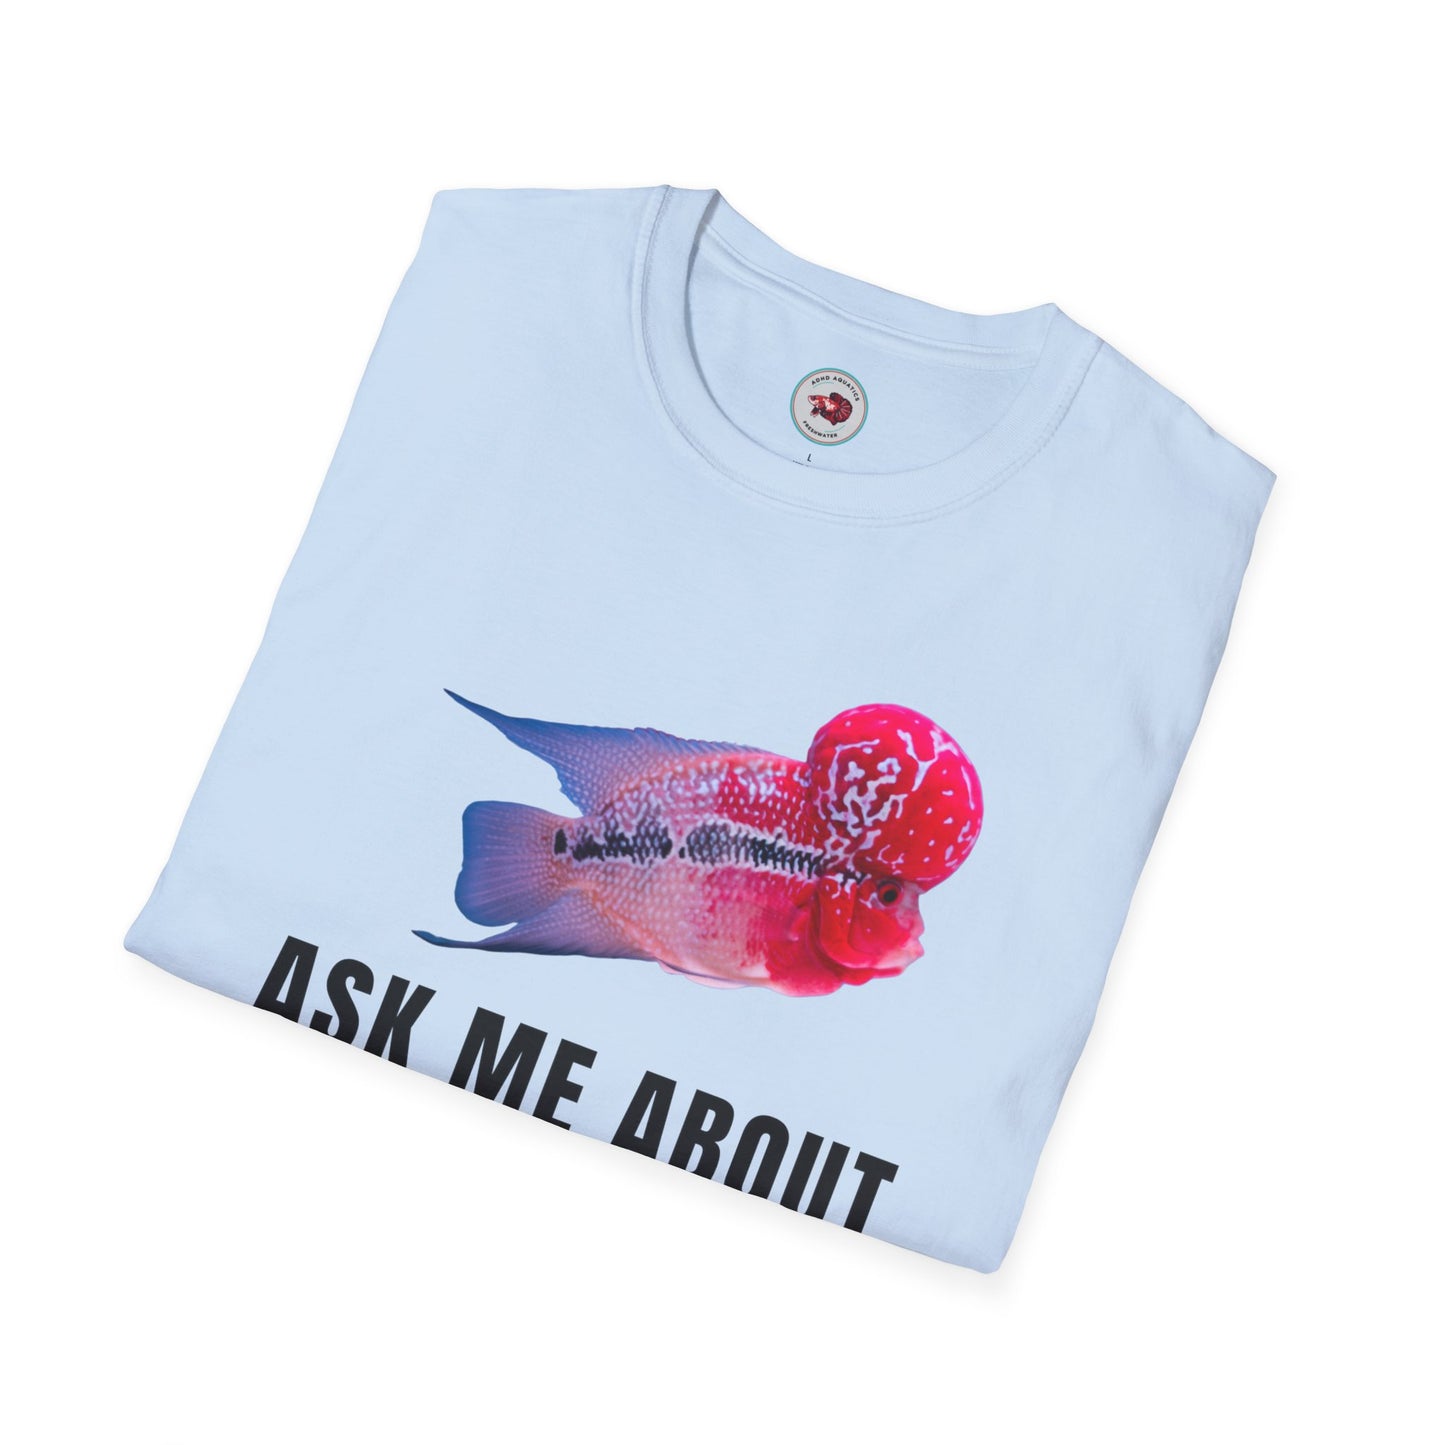 Flowerhorn Ask Me About My KOK Unisex Softstyle T-Shirt by ADHD Aquatics